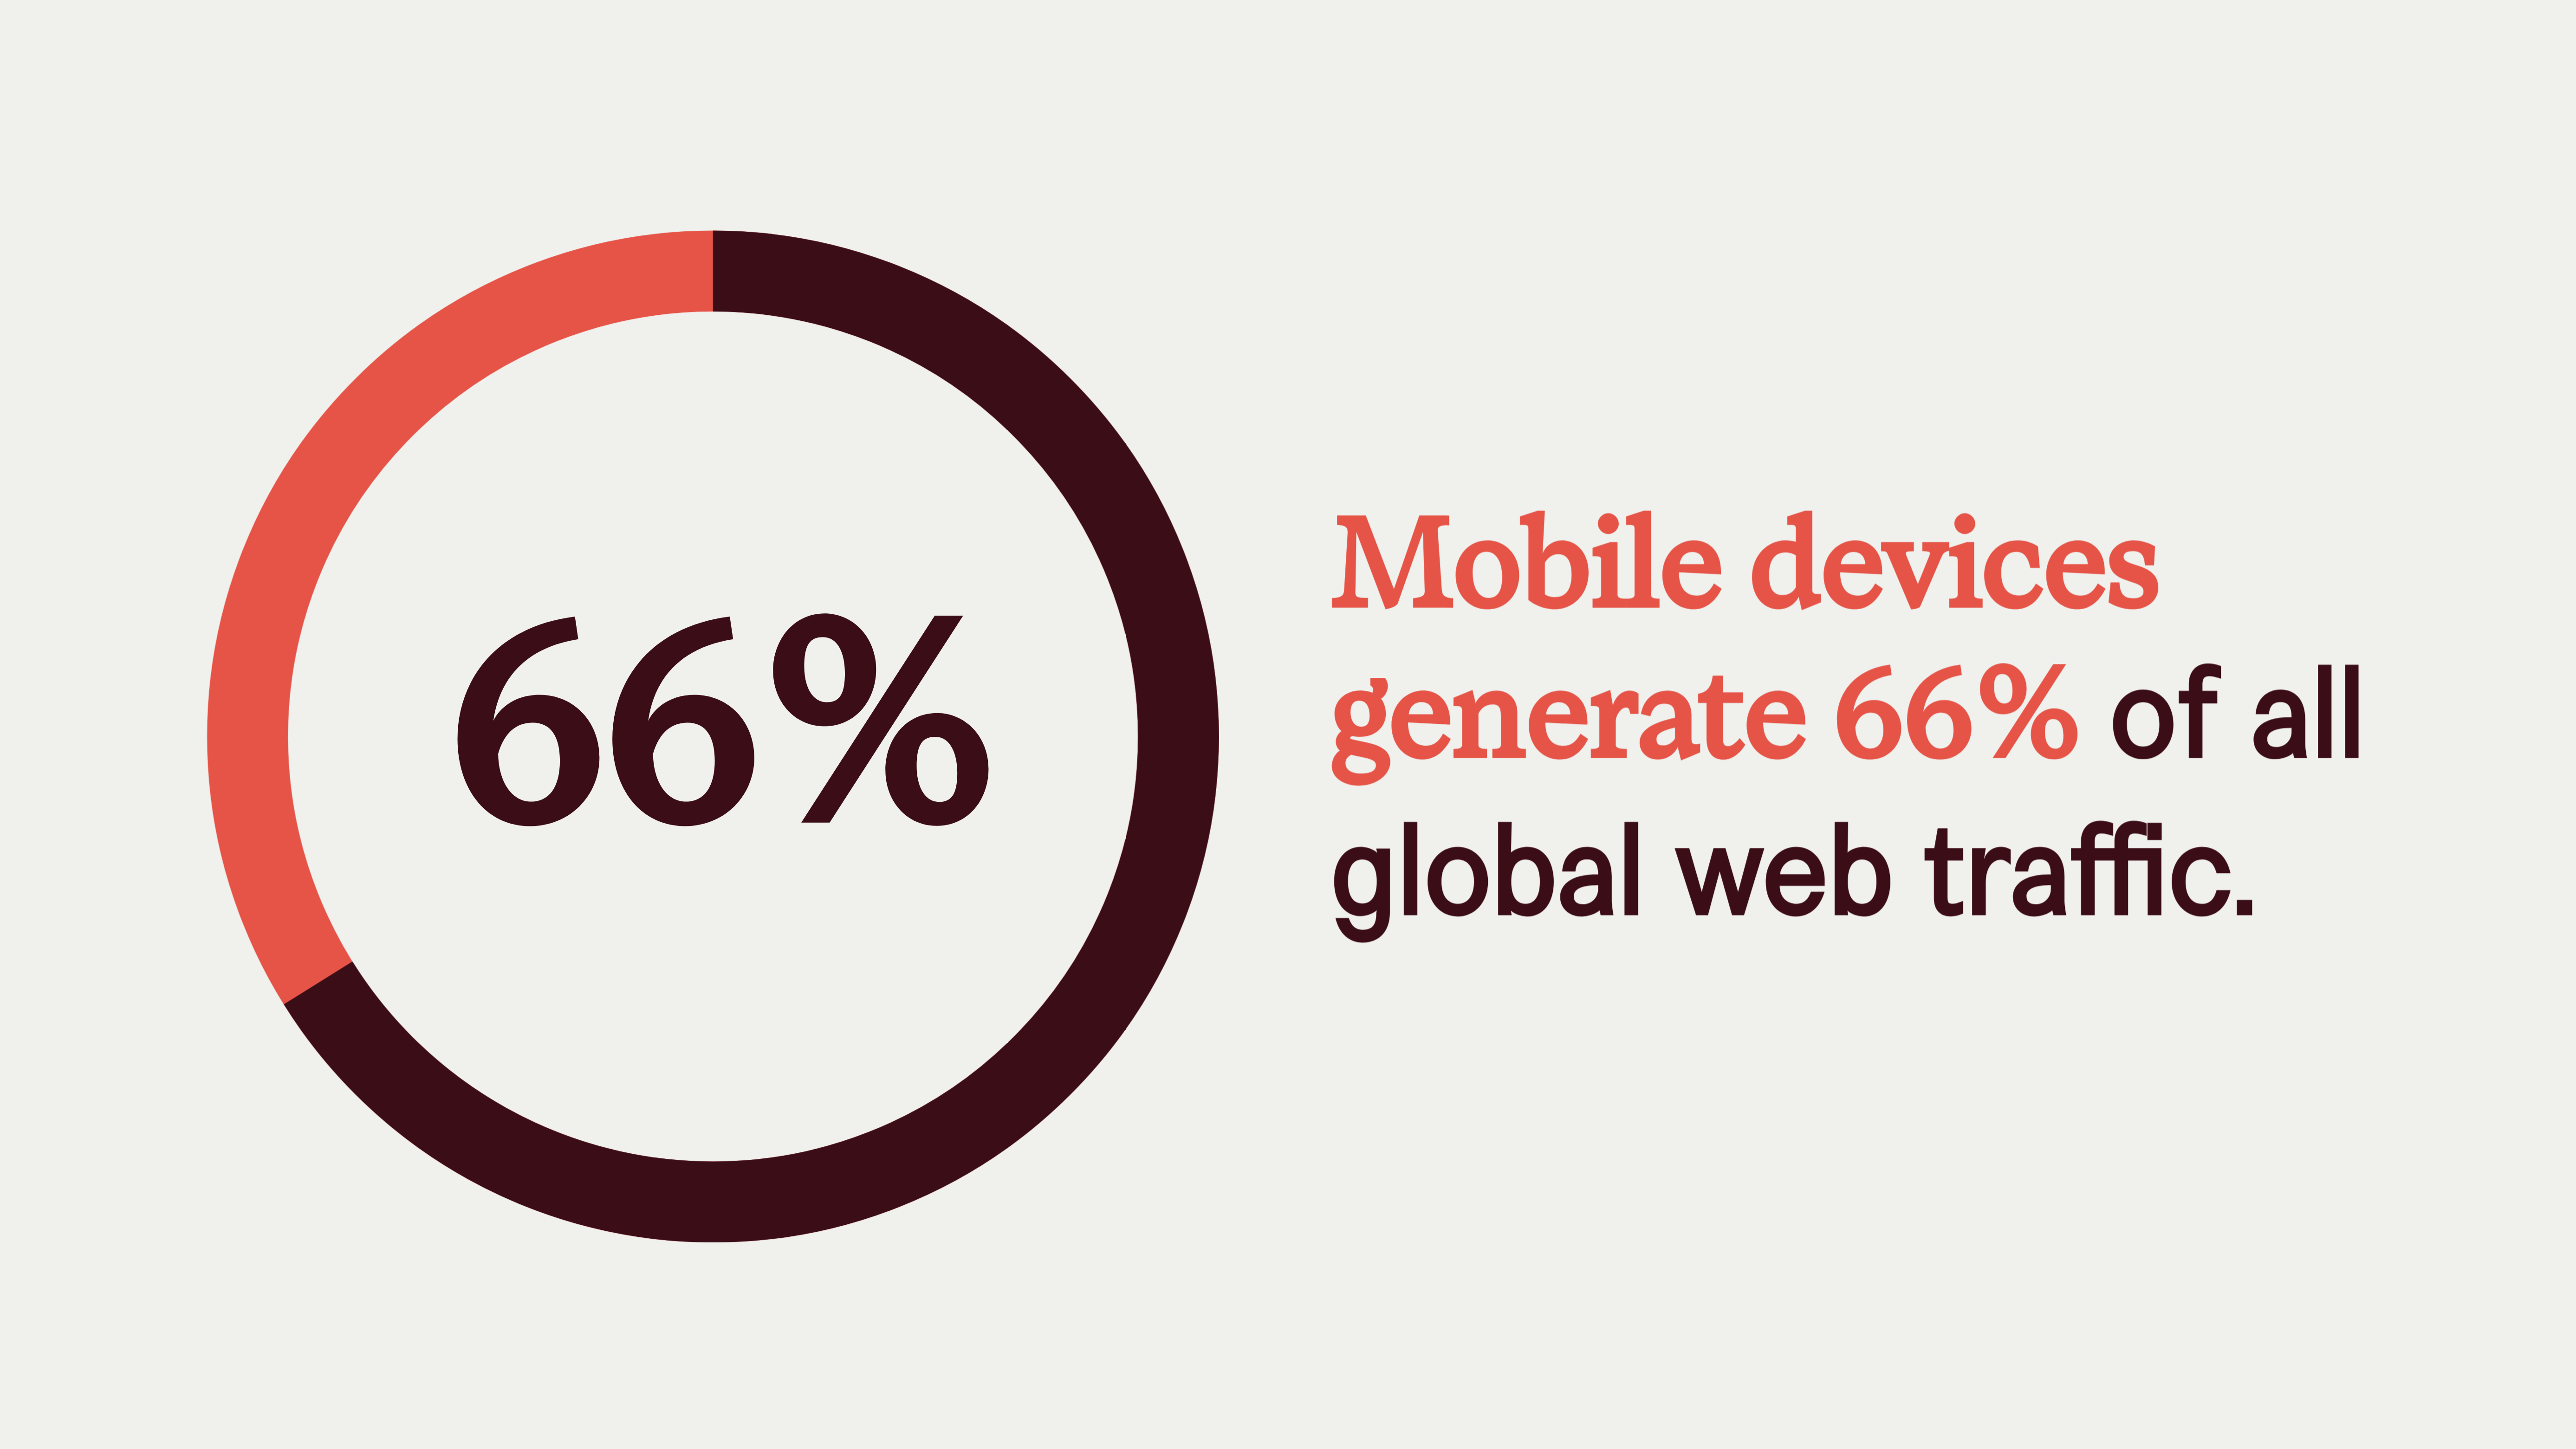 mobile seo stat: Almost 66% of the world’s web traffic comes from mobile devices.